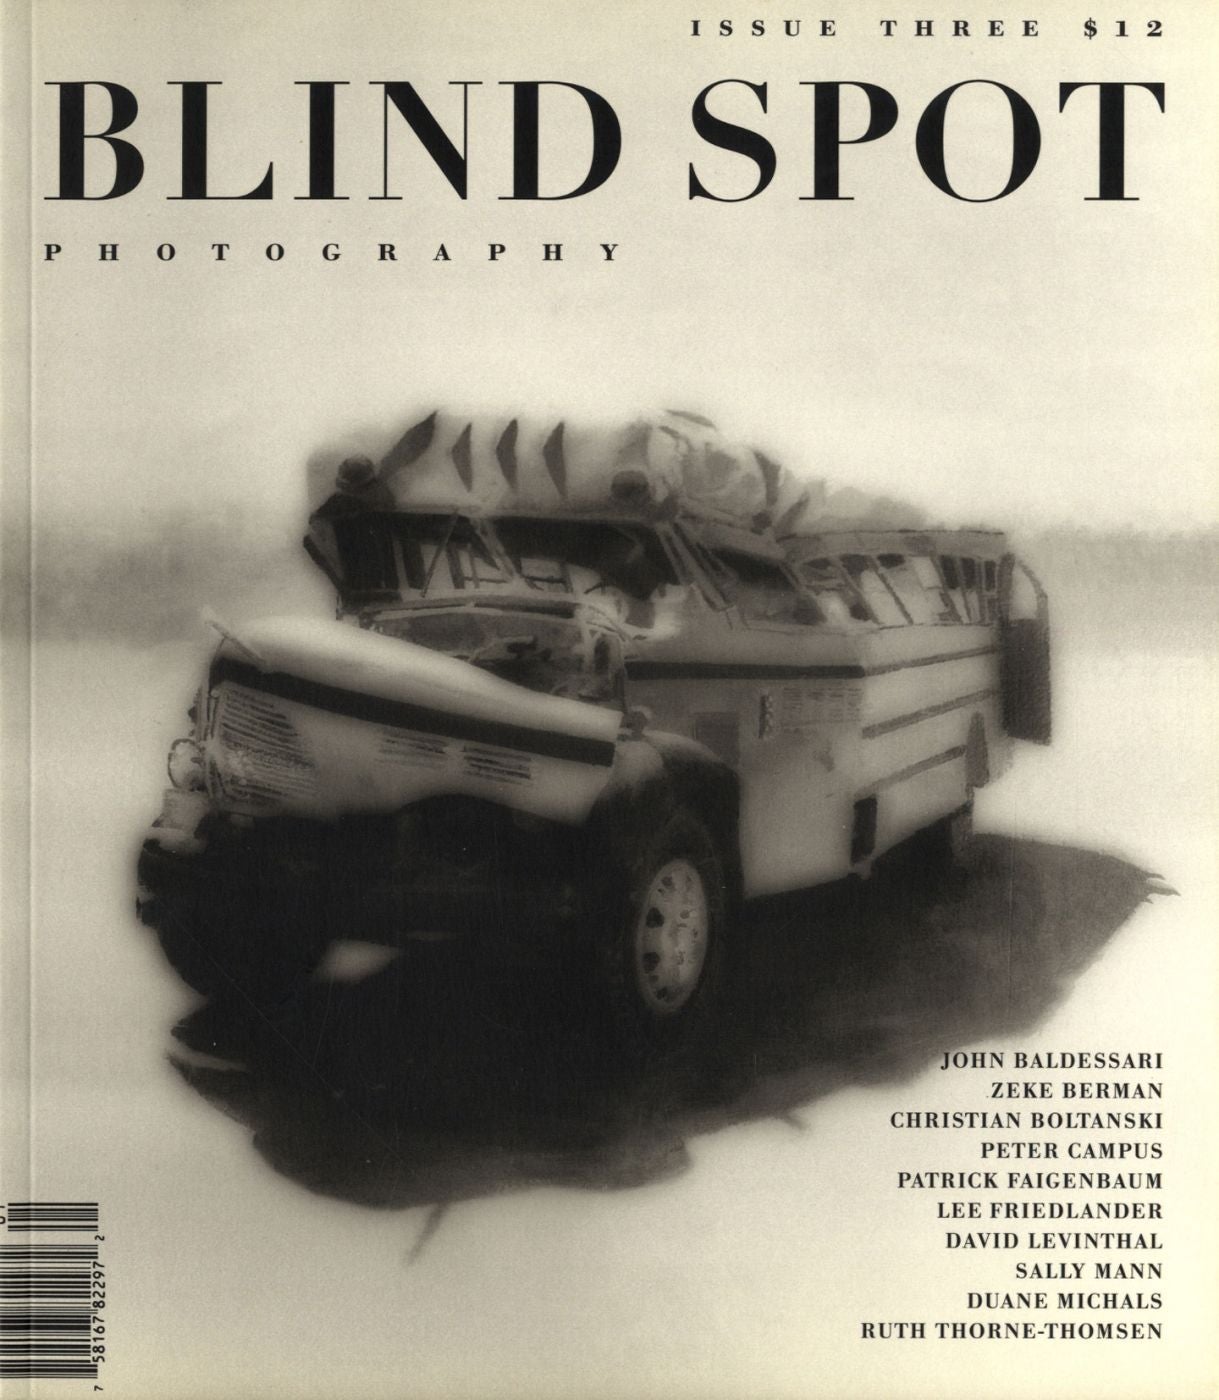 Blind Spot #3 (Photography Journal, Issue Three)